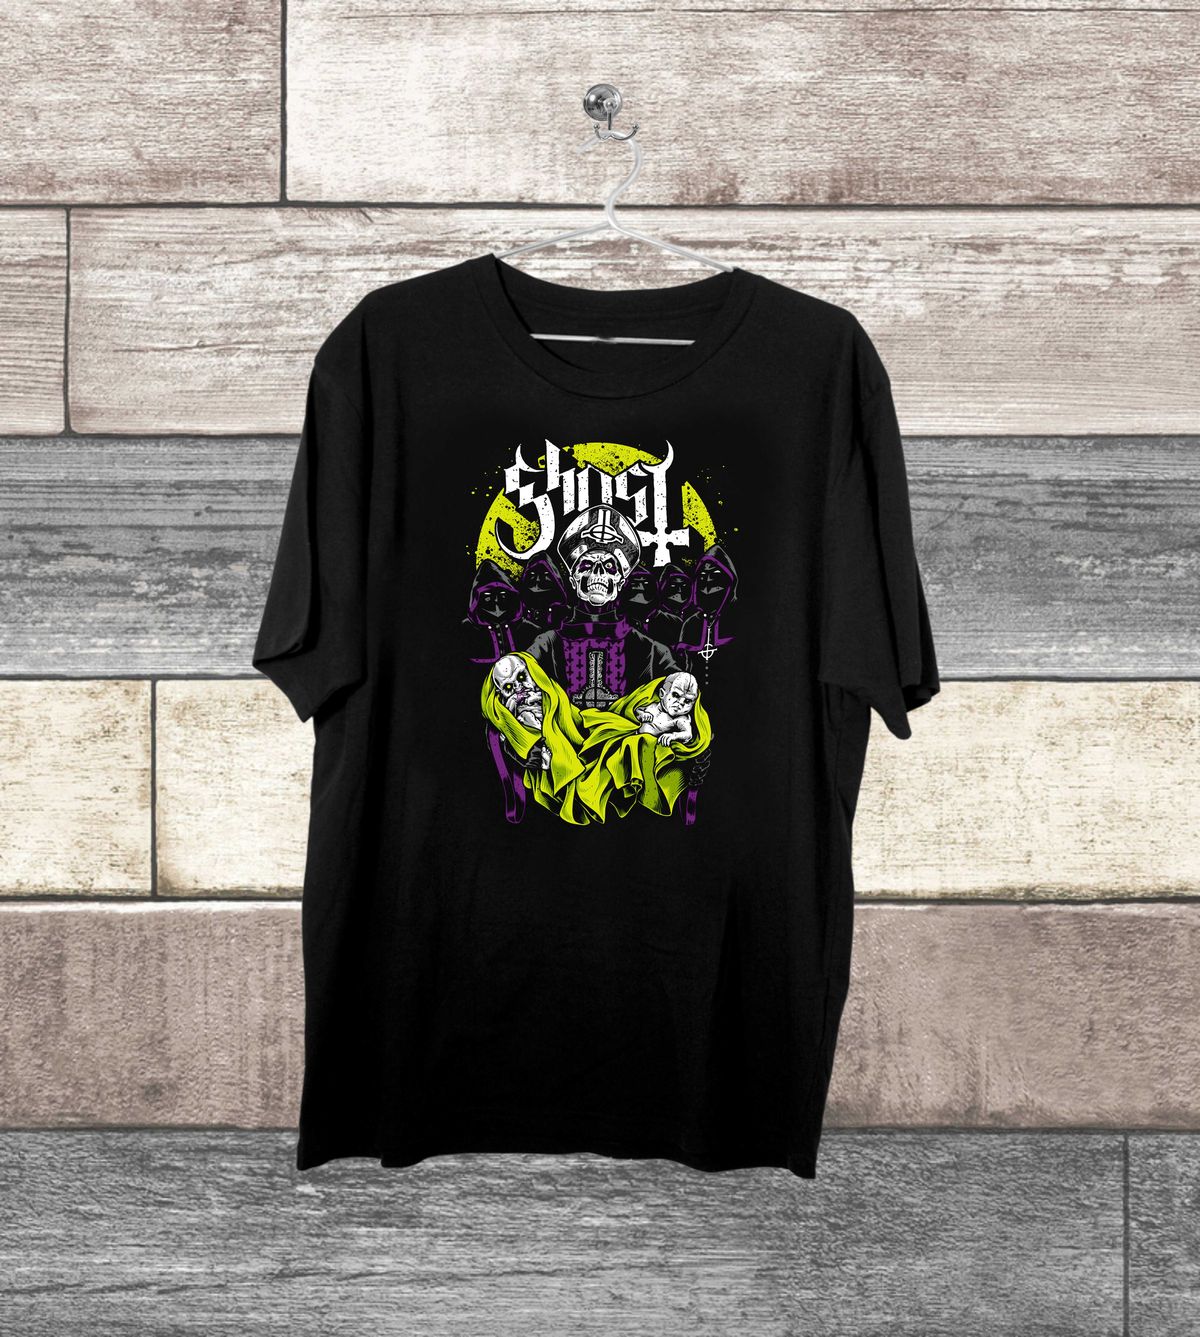 Ghost Band T-Shirt – Metal & Rock T-shirts and Accessories